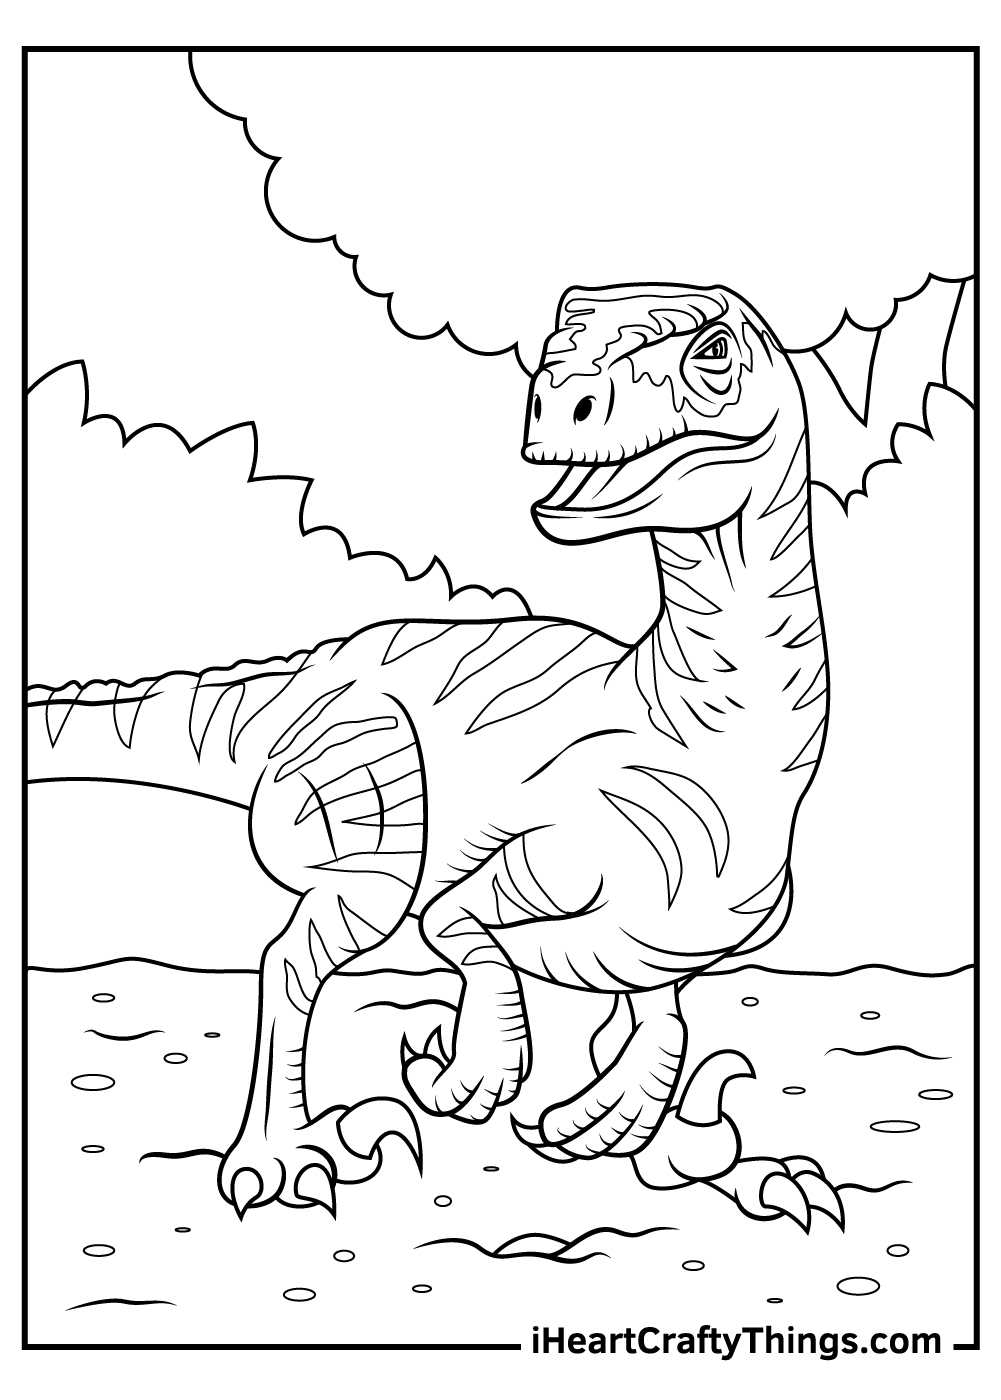 Printable Jurassic Park Coloring Pages Updated 2021 